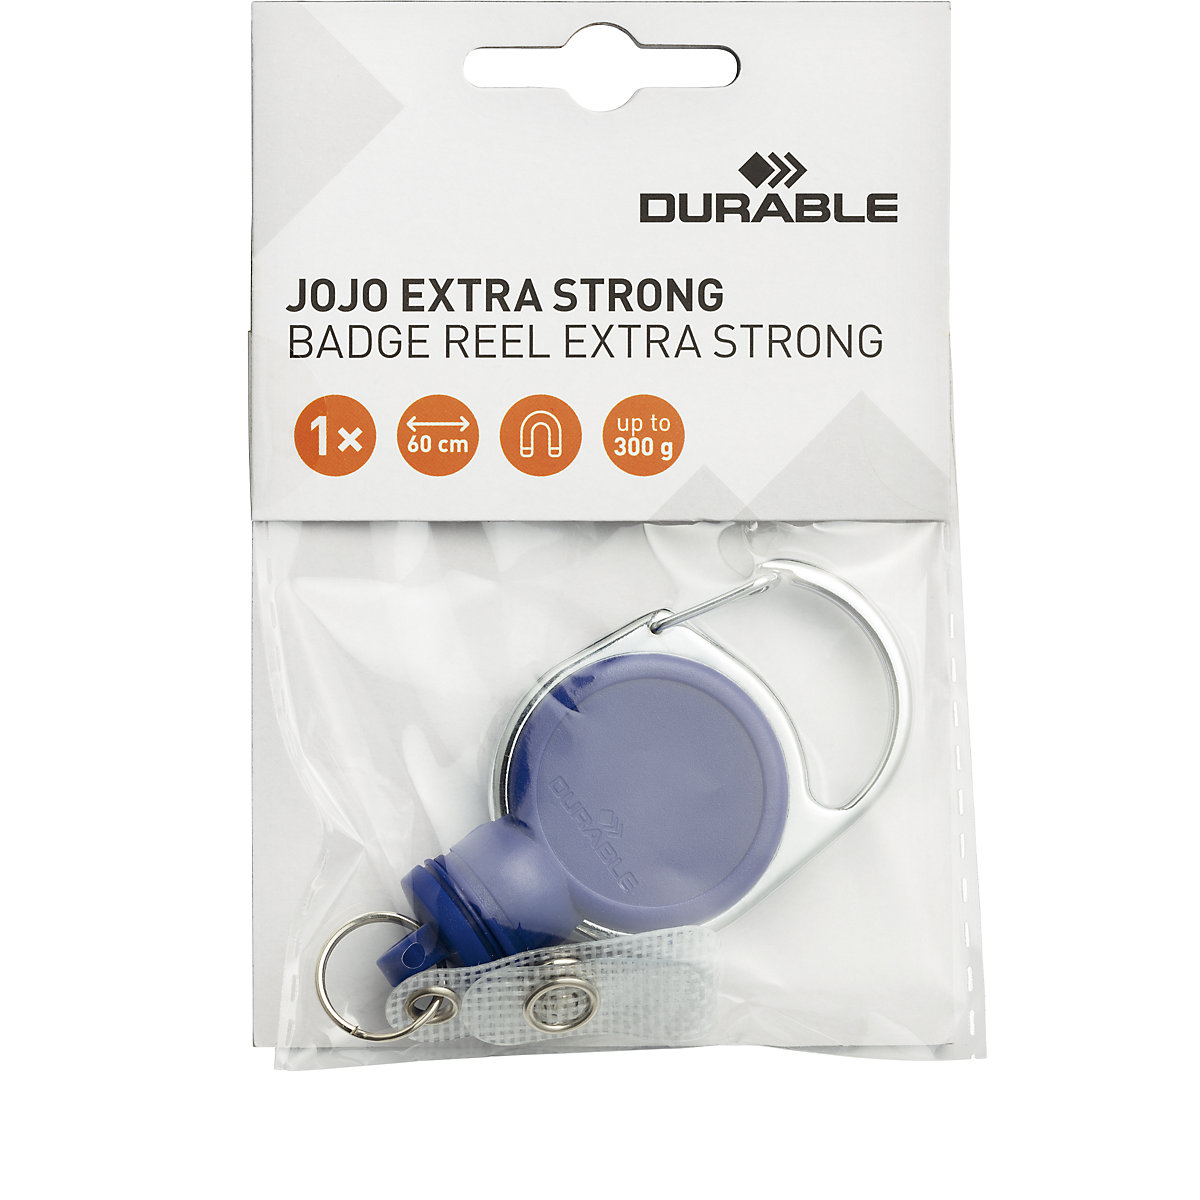 YOYO EXTRA STRONG ID badge holder – DURABLE: with snap fastener